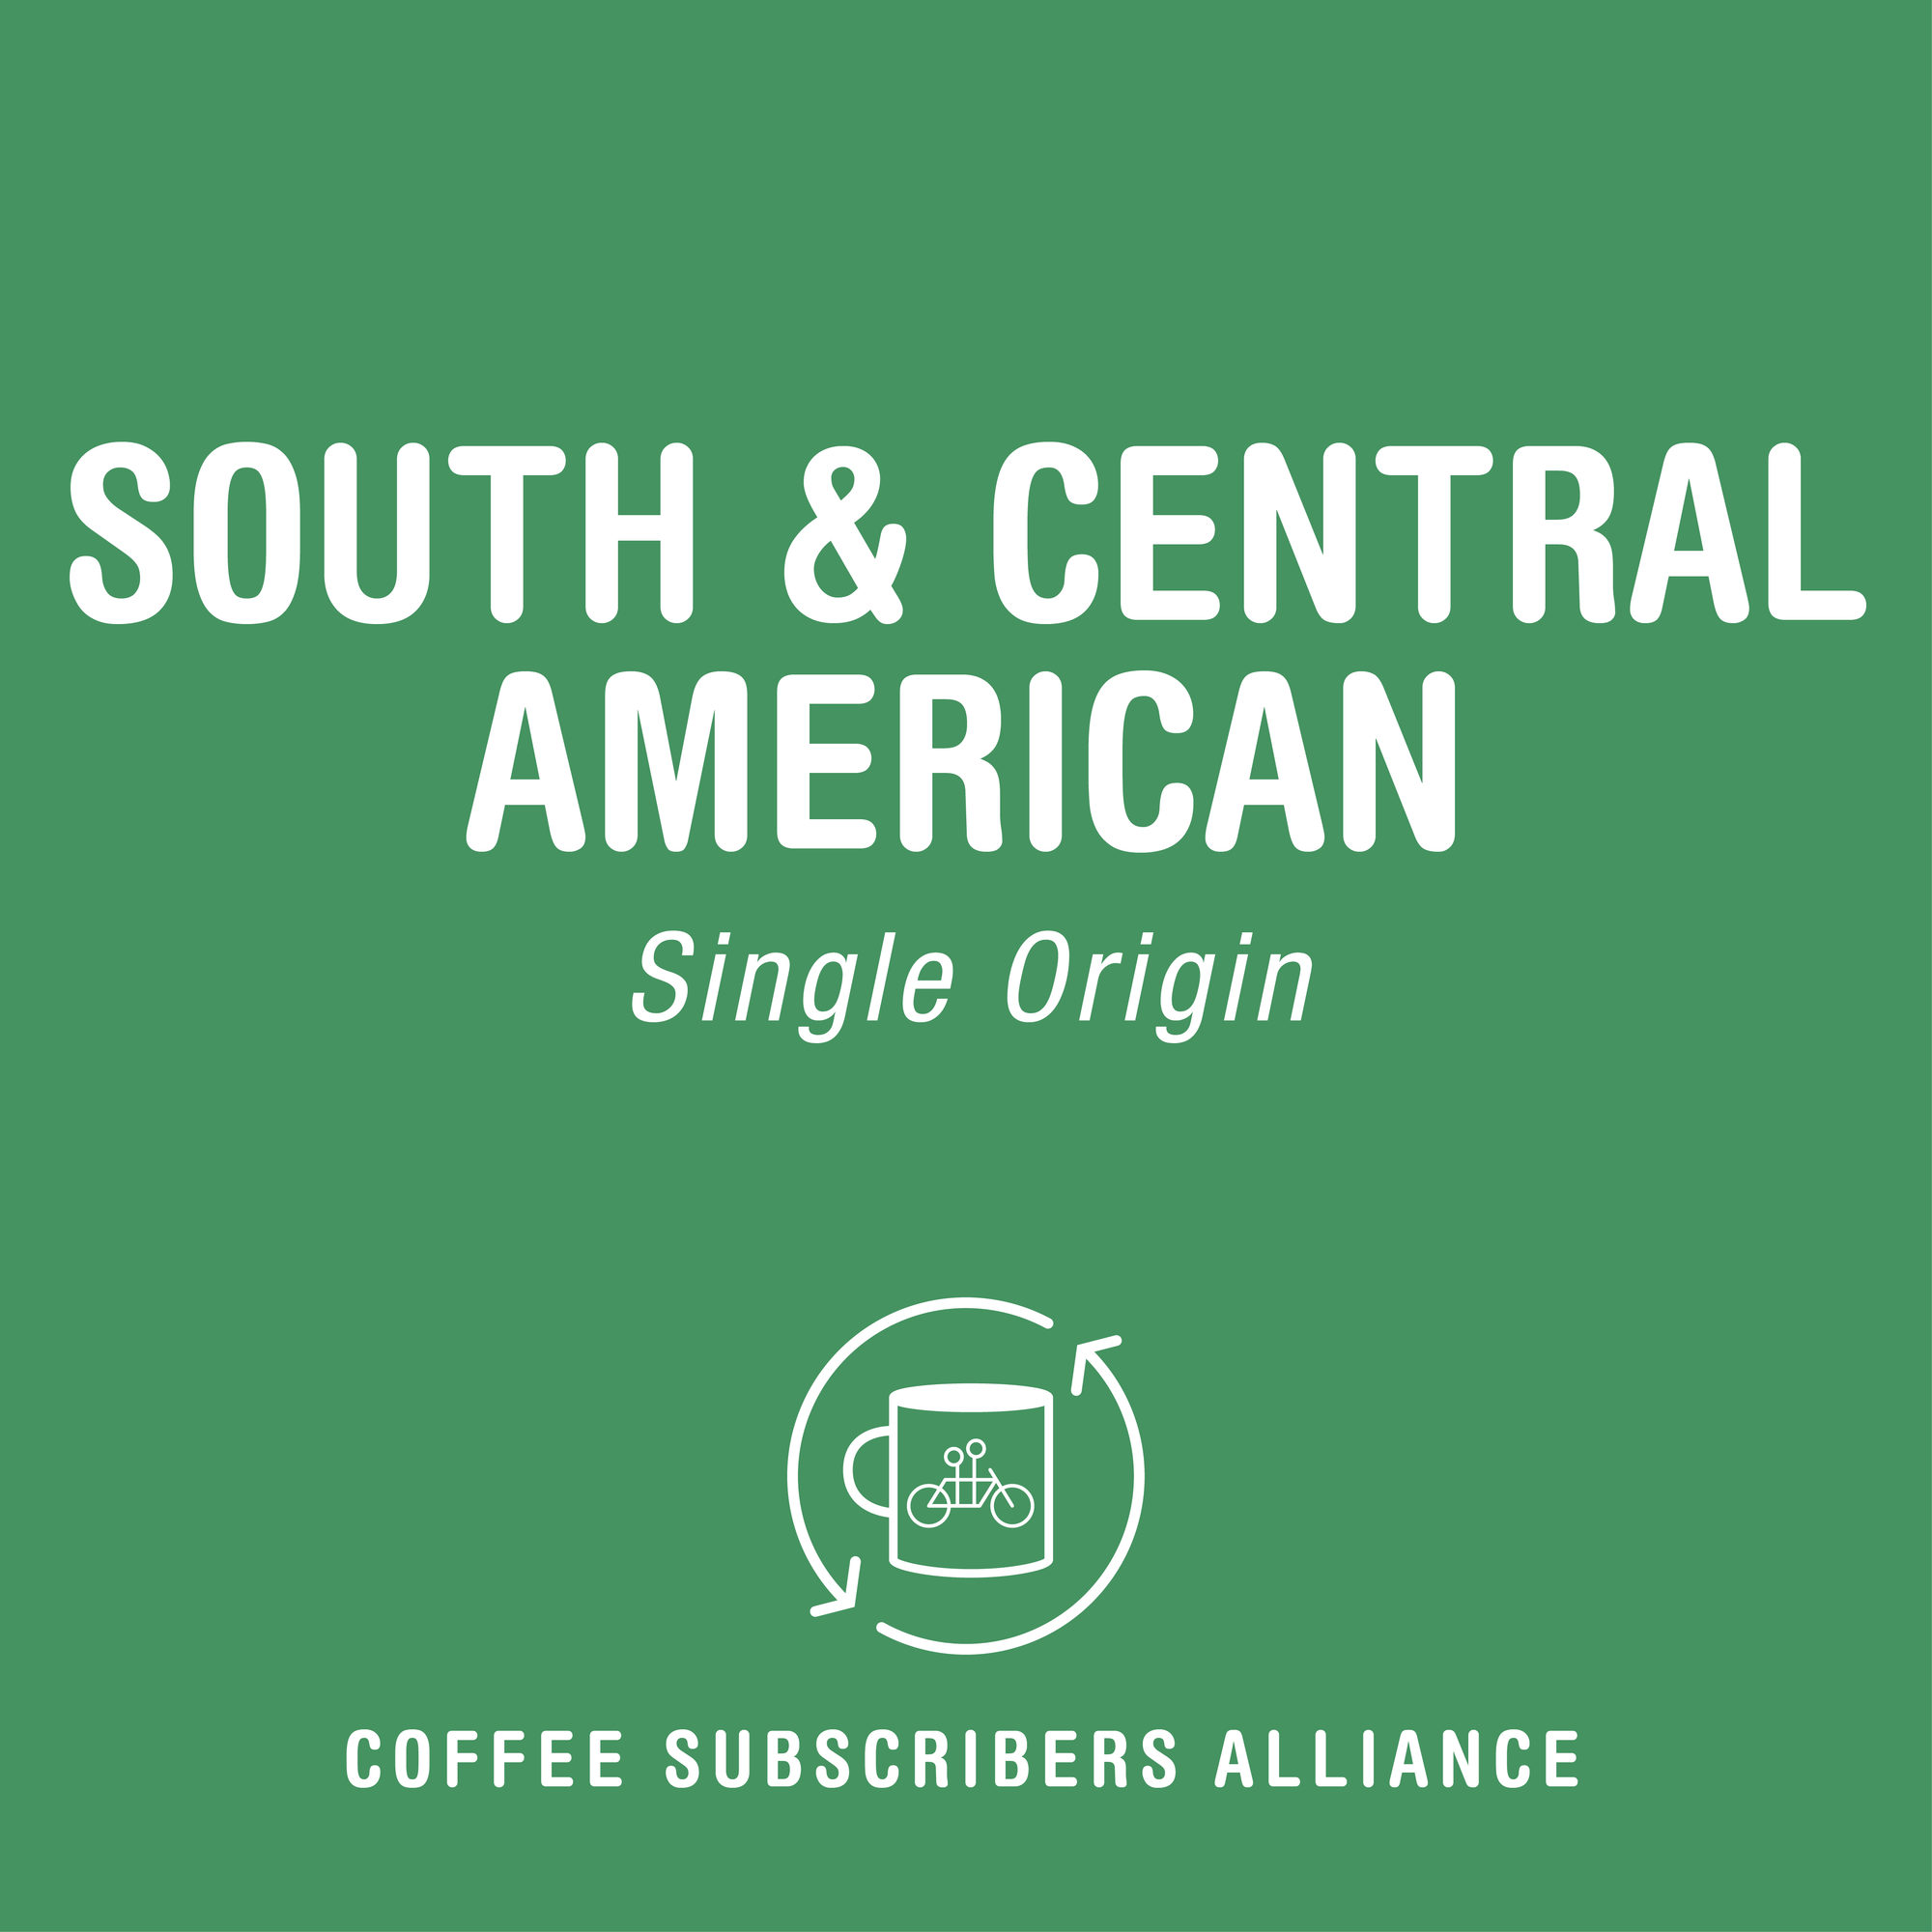 A graphic featuring bold white text that reads "South & Central American Subscription Gift - 2 Weeks x 6" with an emblem of a coffee cup encircled by a bicycle, representing the Tandem Coffee Roasters coffee subscribers alliance on a green background.